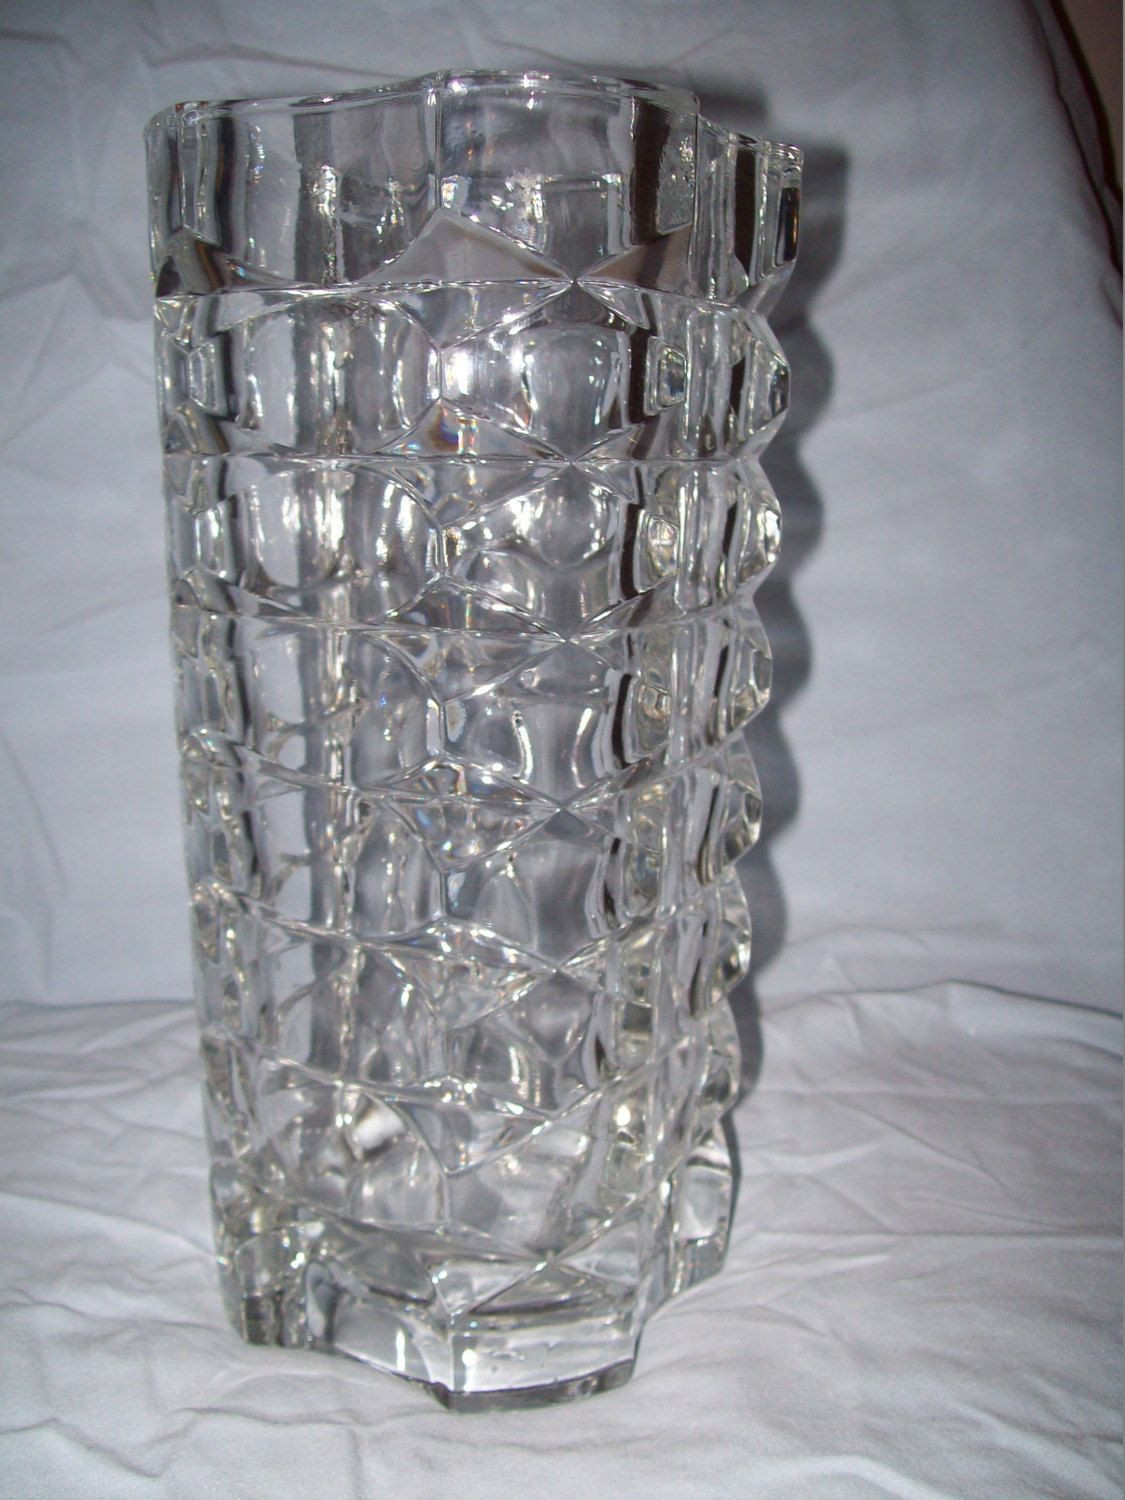 13 Popular Heavy Cut Glass Vase 2024 free download heavy cut glass vase of lead crystal vases stock hand cut lead crystal large award vase can in lead crystal vases pics clear glass very old large vase leaded glass very heavy 66 00